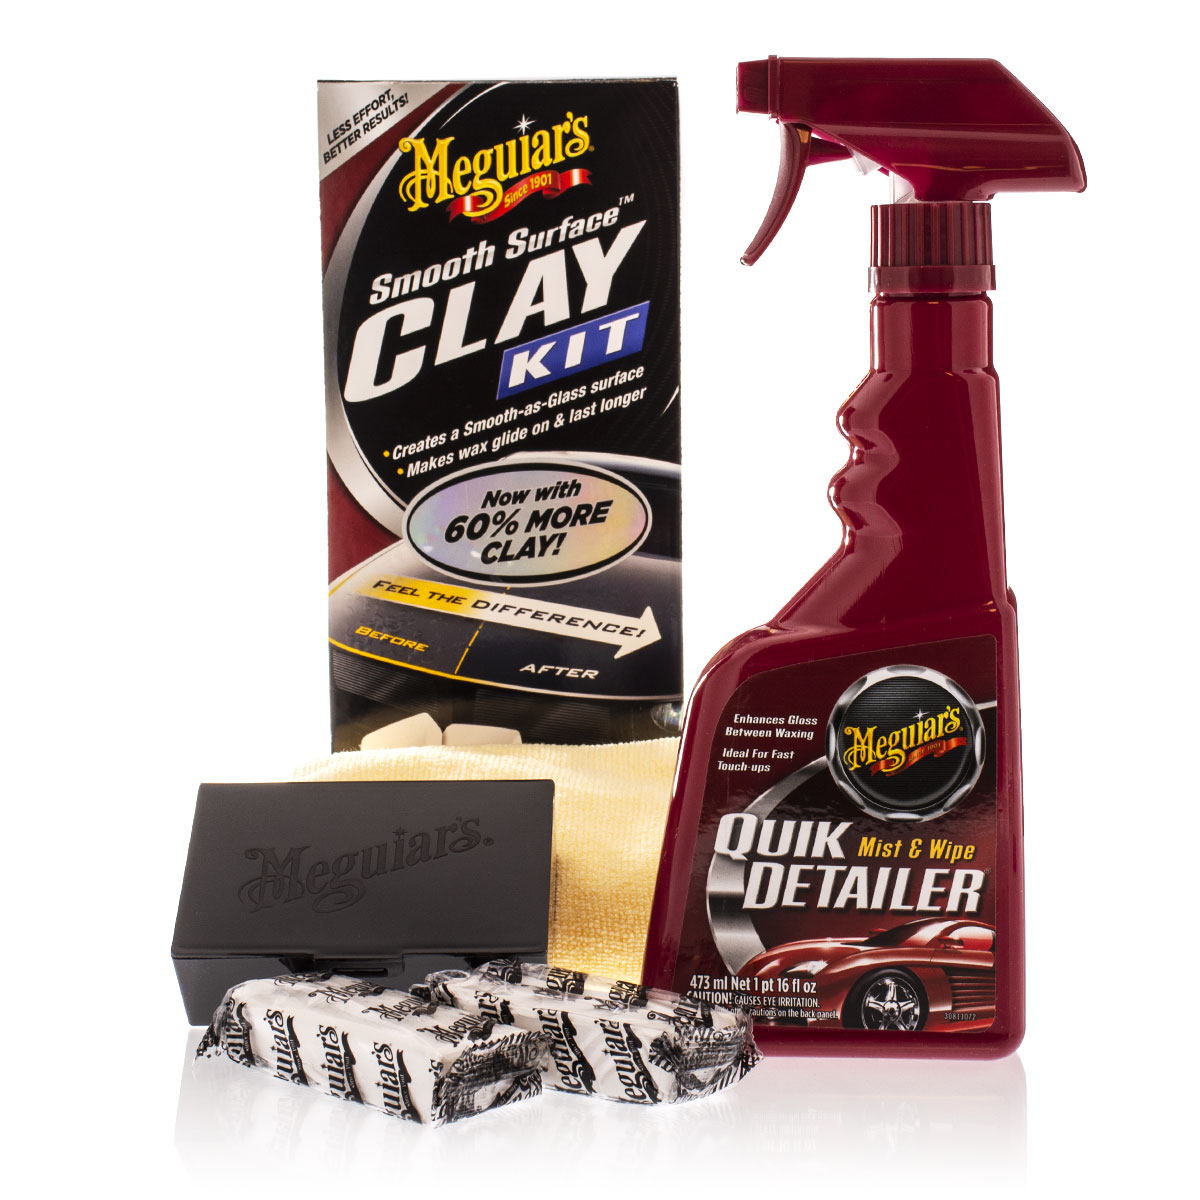 Meguiars Smooth Surface Clay Kit - G1016